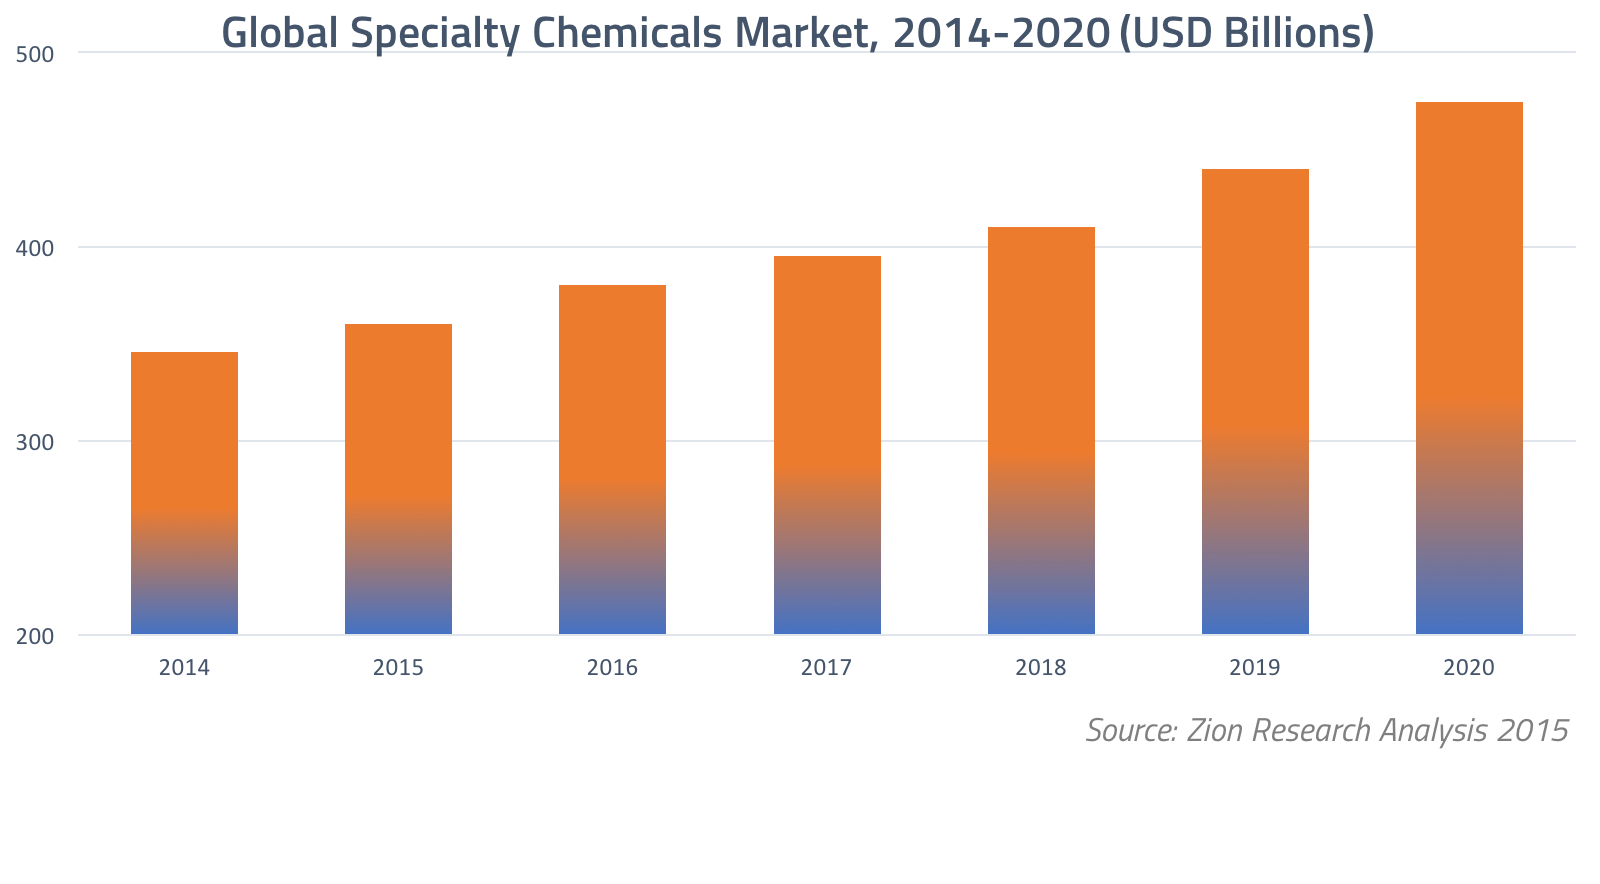 Specialty Chemicals Growth